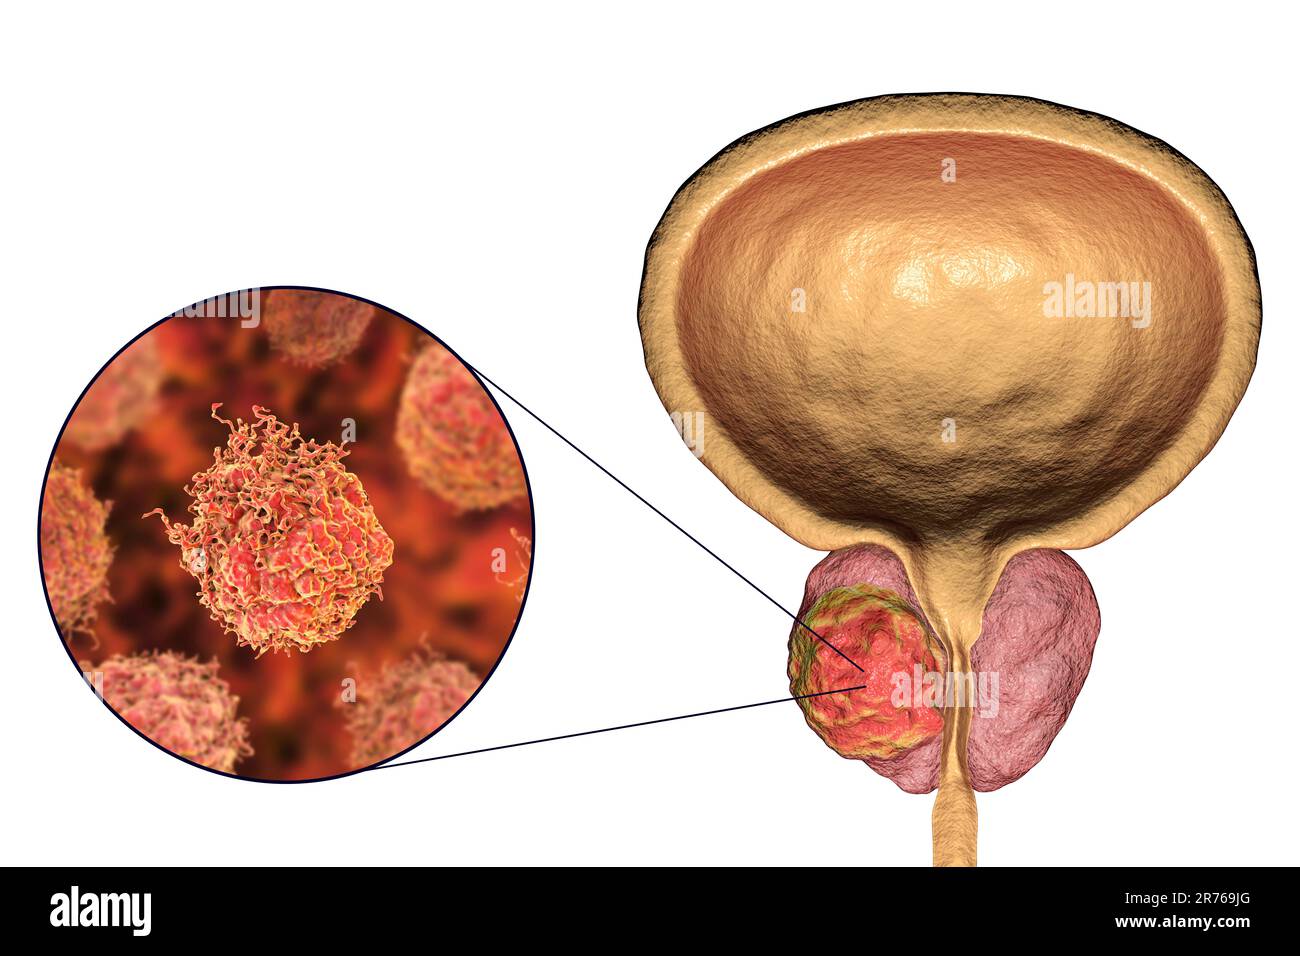 Prostate cancer. Computer artwork of a cancerous tumour in the prostate gland (right) and close-up view of prostate cancer cells (left). The urethra c Stock Photo